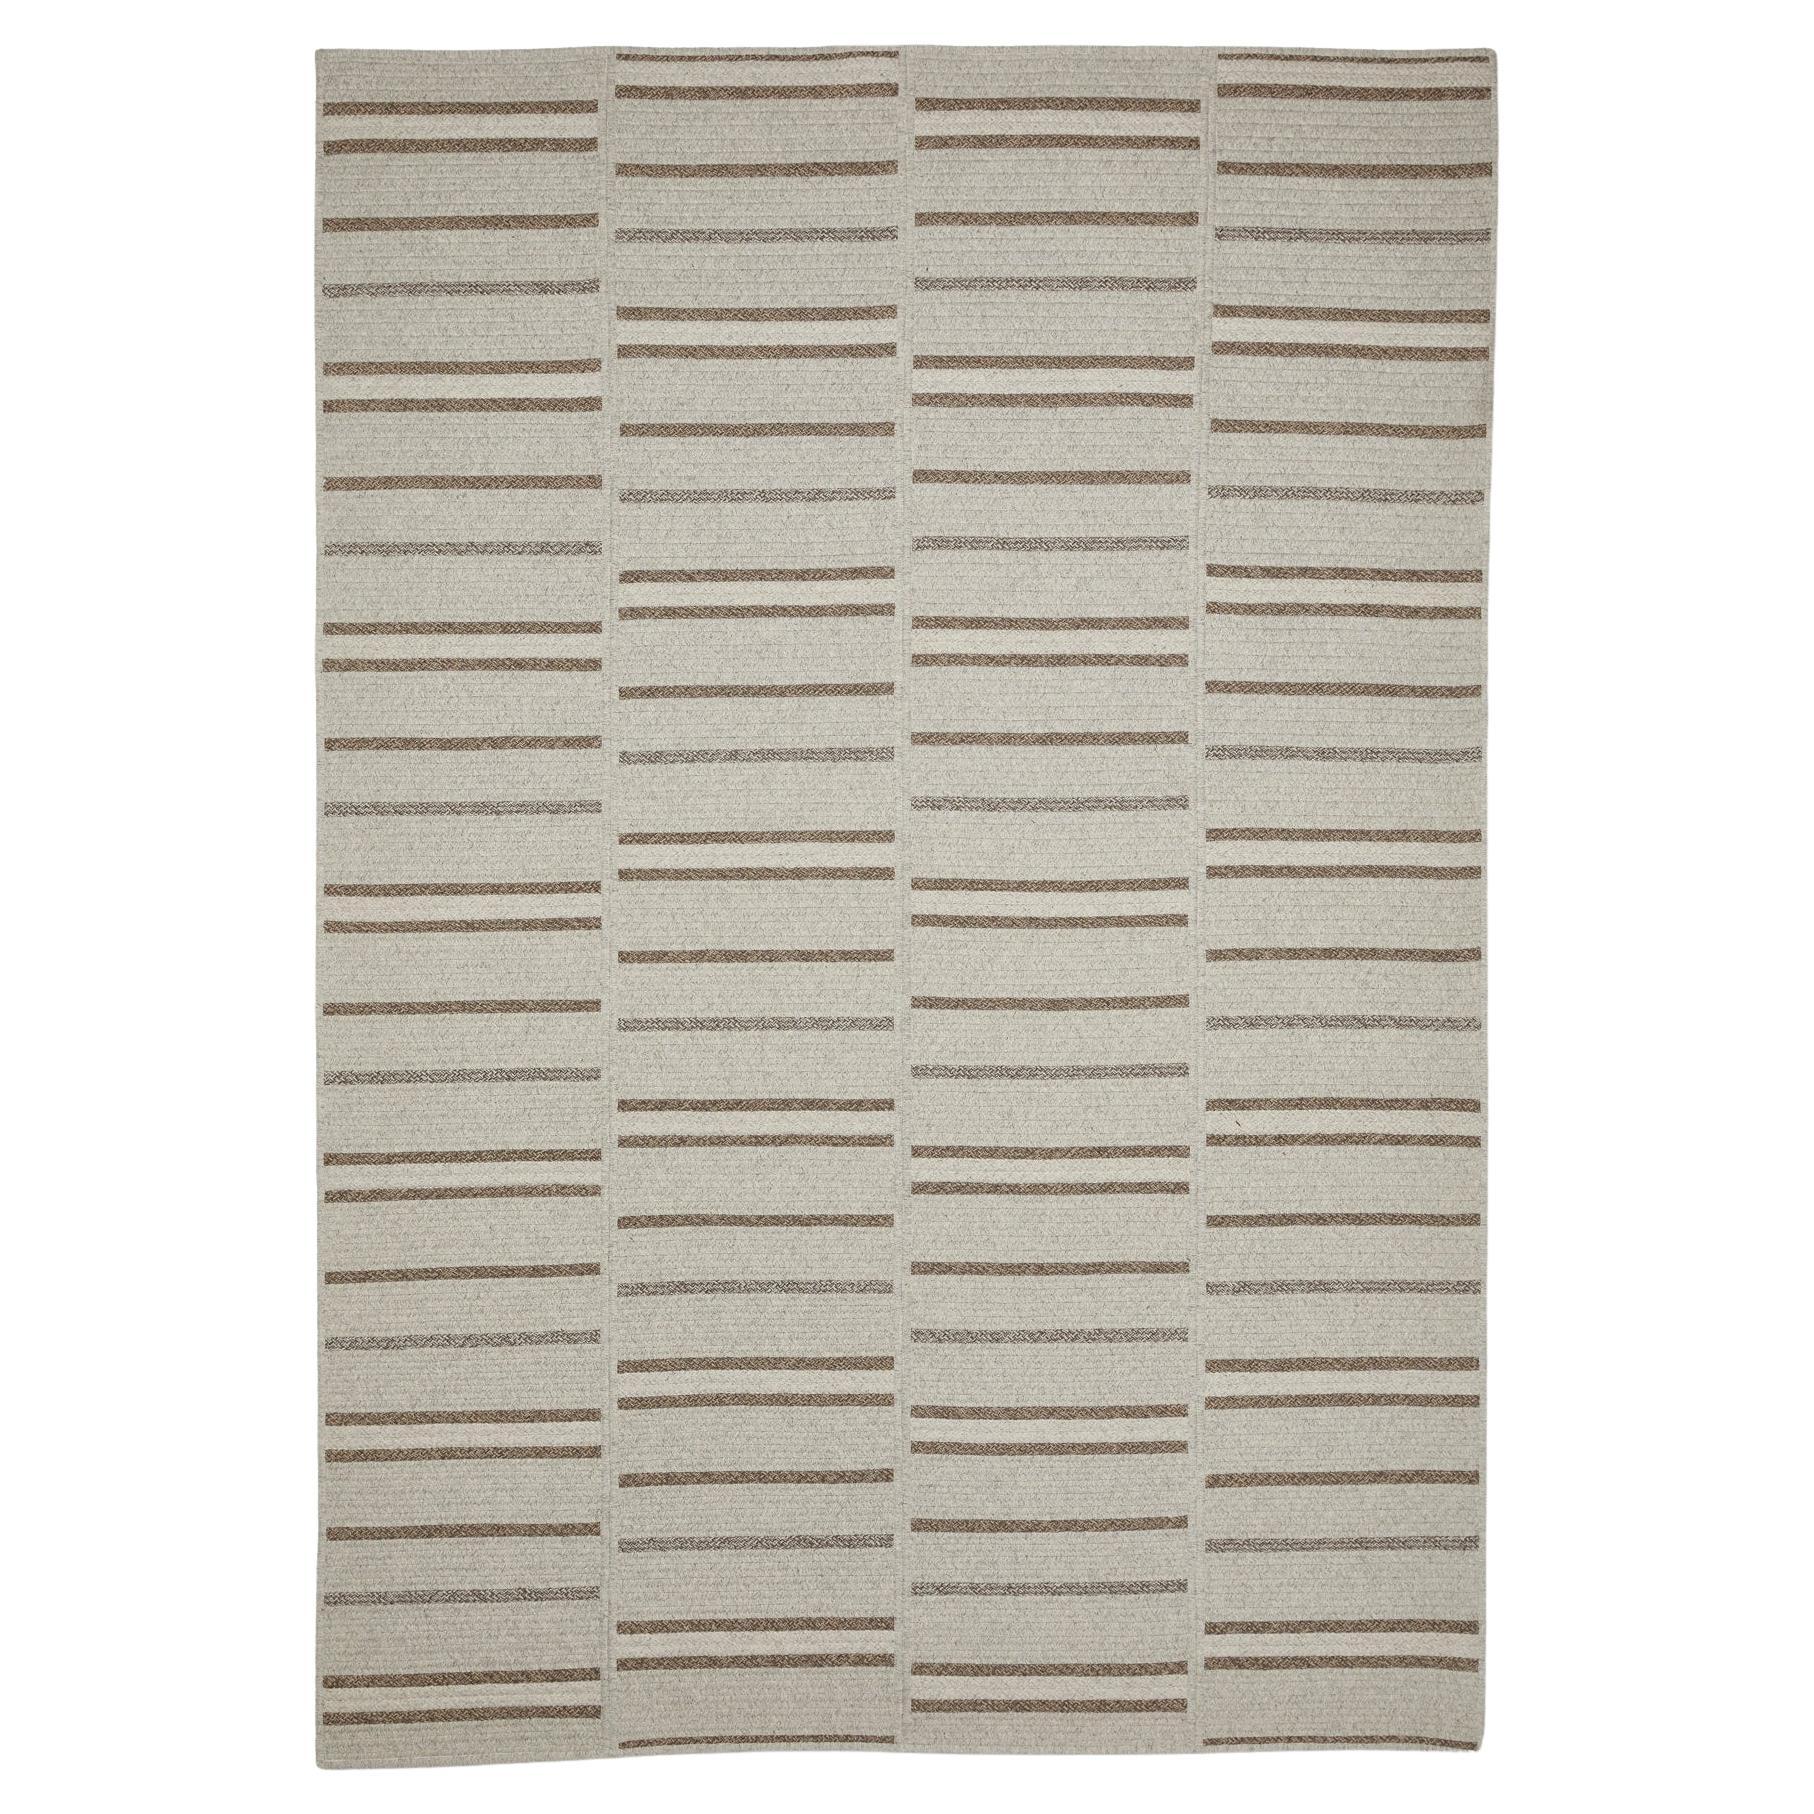 Thayer Design Studio, Natural Wool, Light Grey and Brown, 6' x 9' Trace Rug For Sale